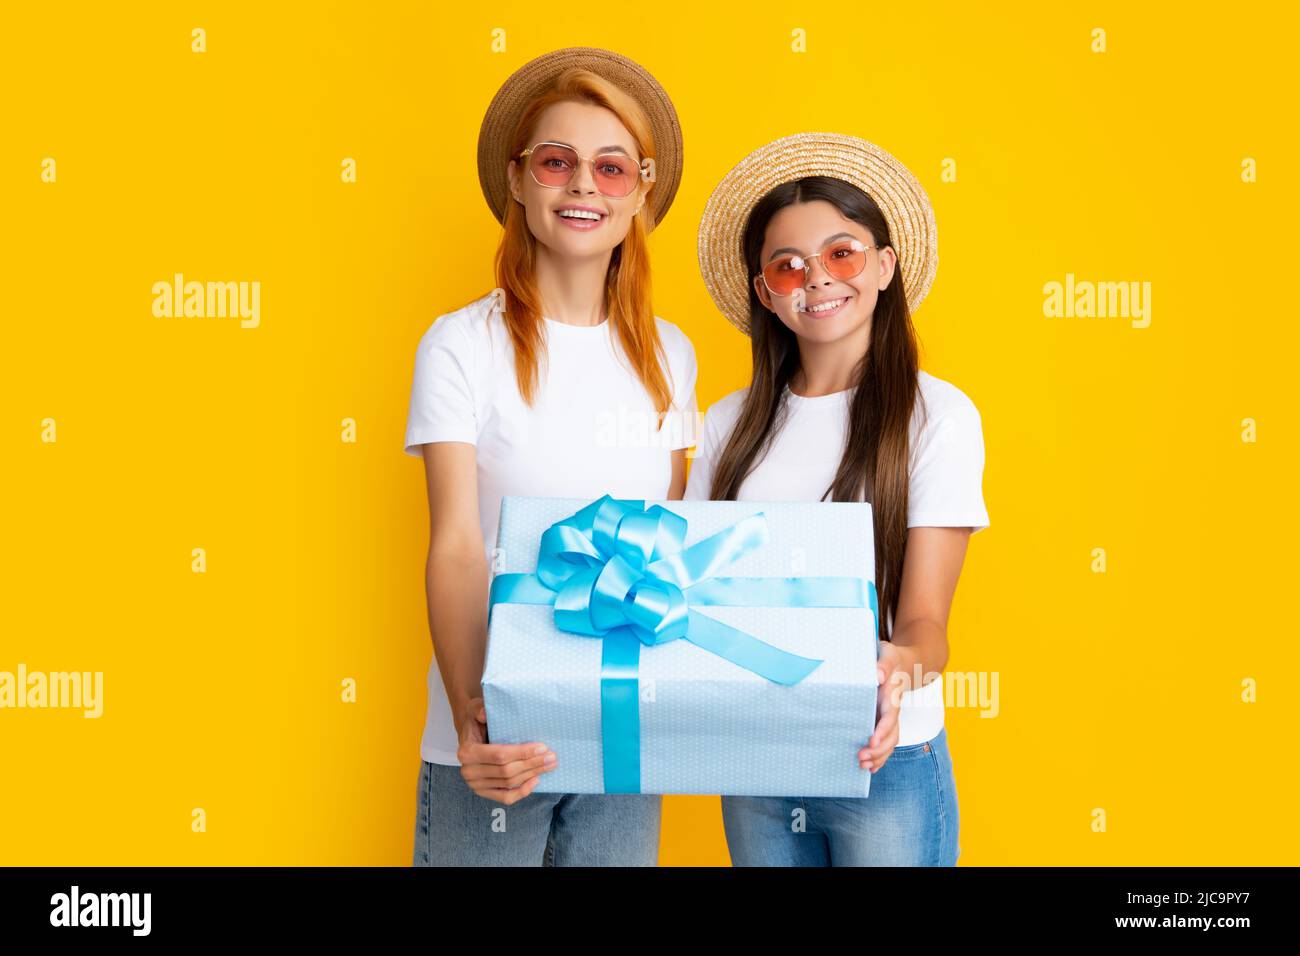 Family of mother and daughter in casual clothes celebrating, hold red present box gift, isolated on yellow background, studio portrait. Stock Photo